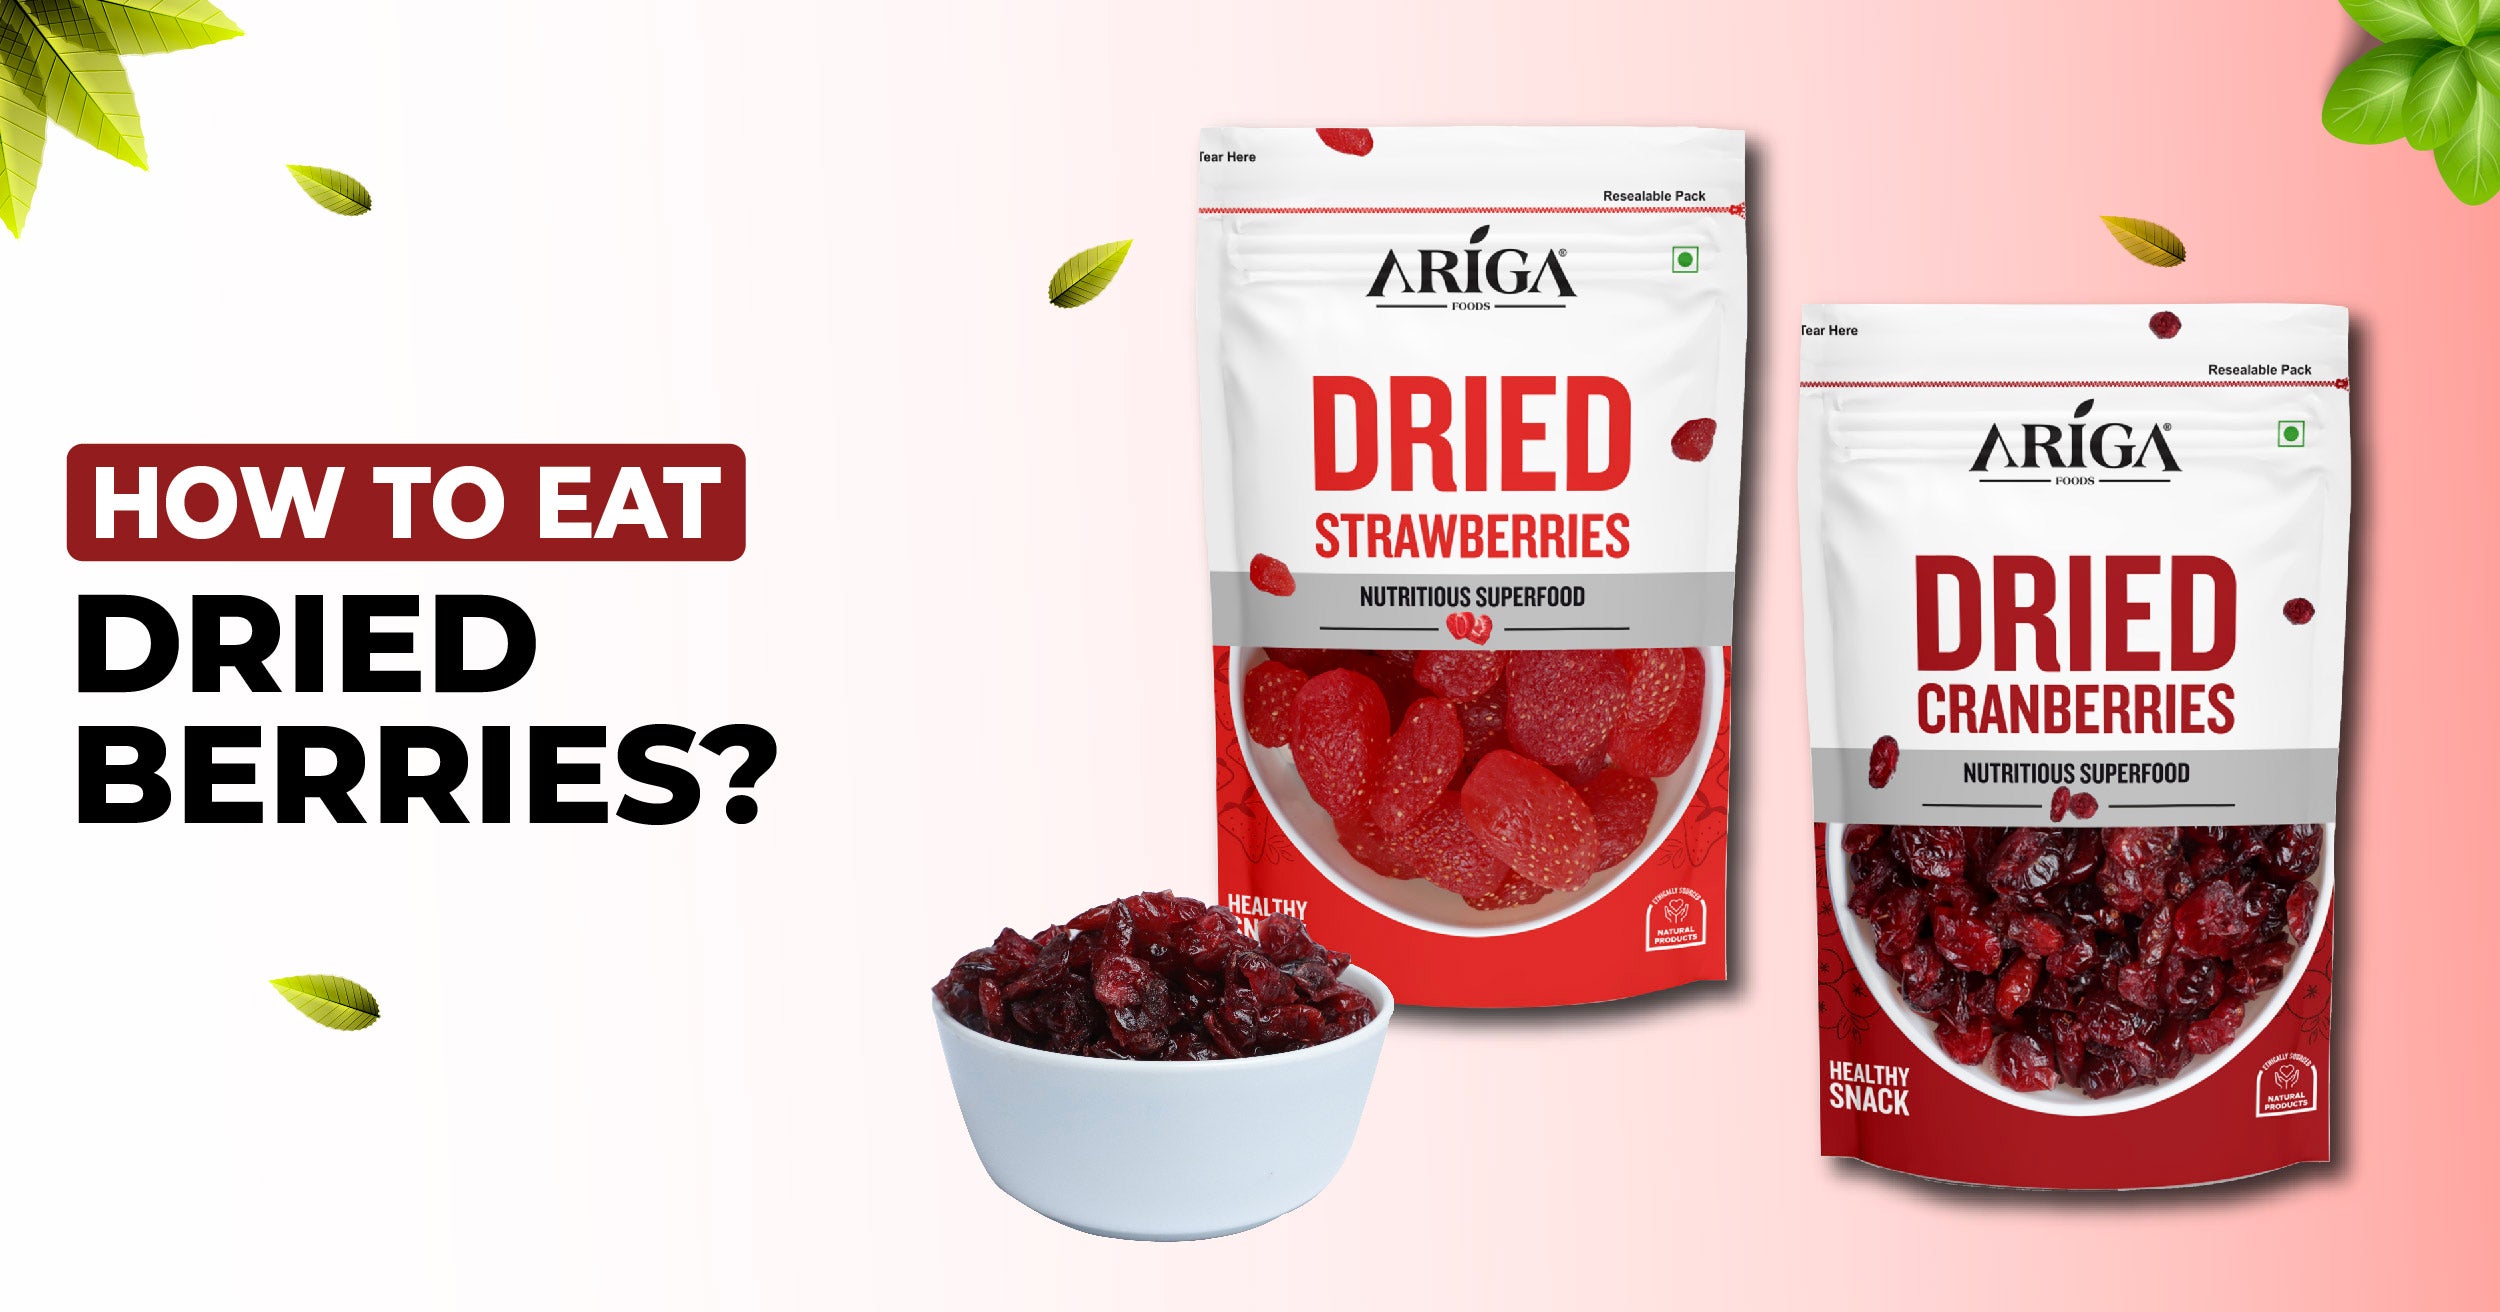 How to eat dried berries?